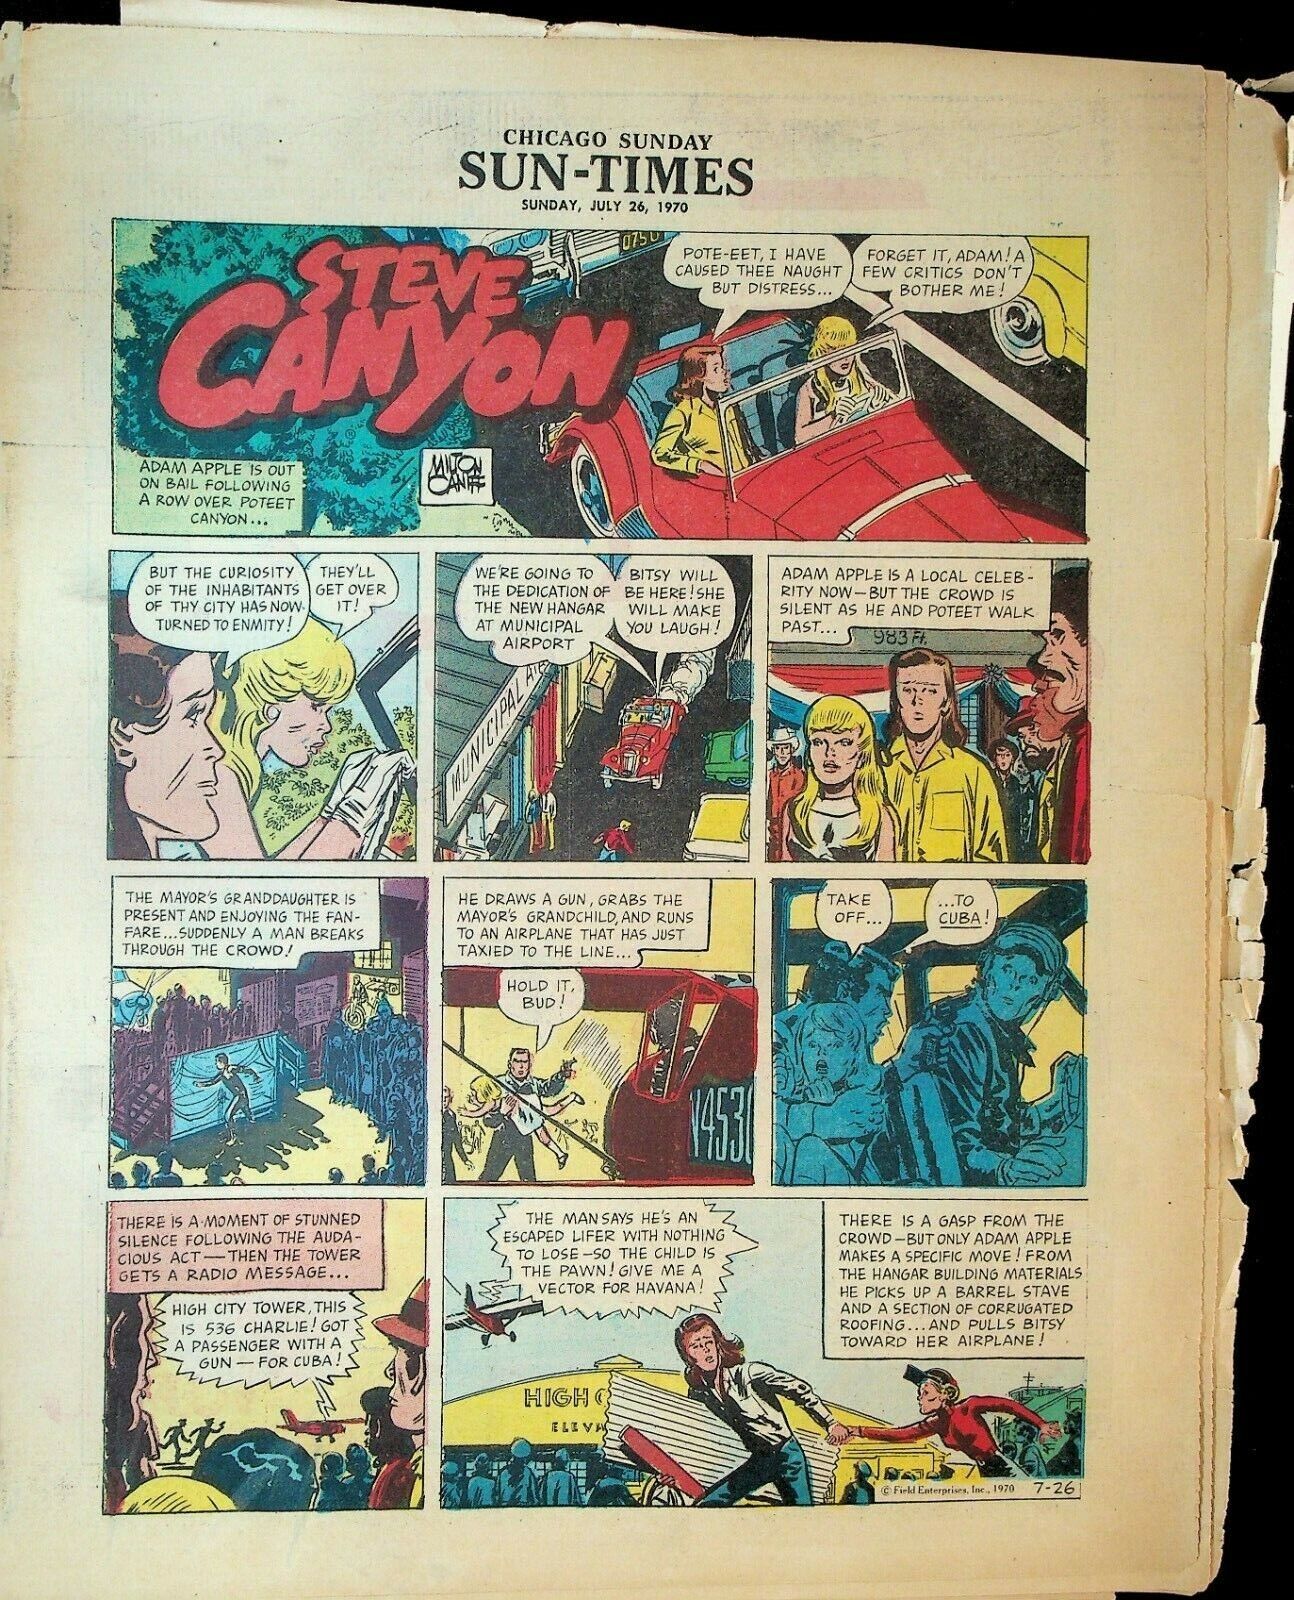 Chicago Sunday Sun-Times Comic Section July 26 1970 Steve Canyon Mary Worth